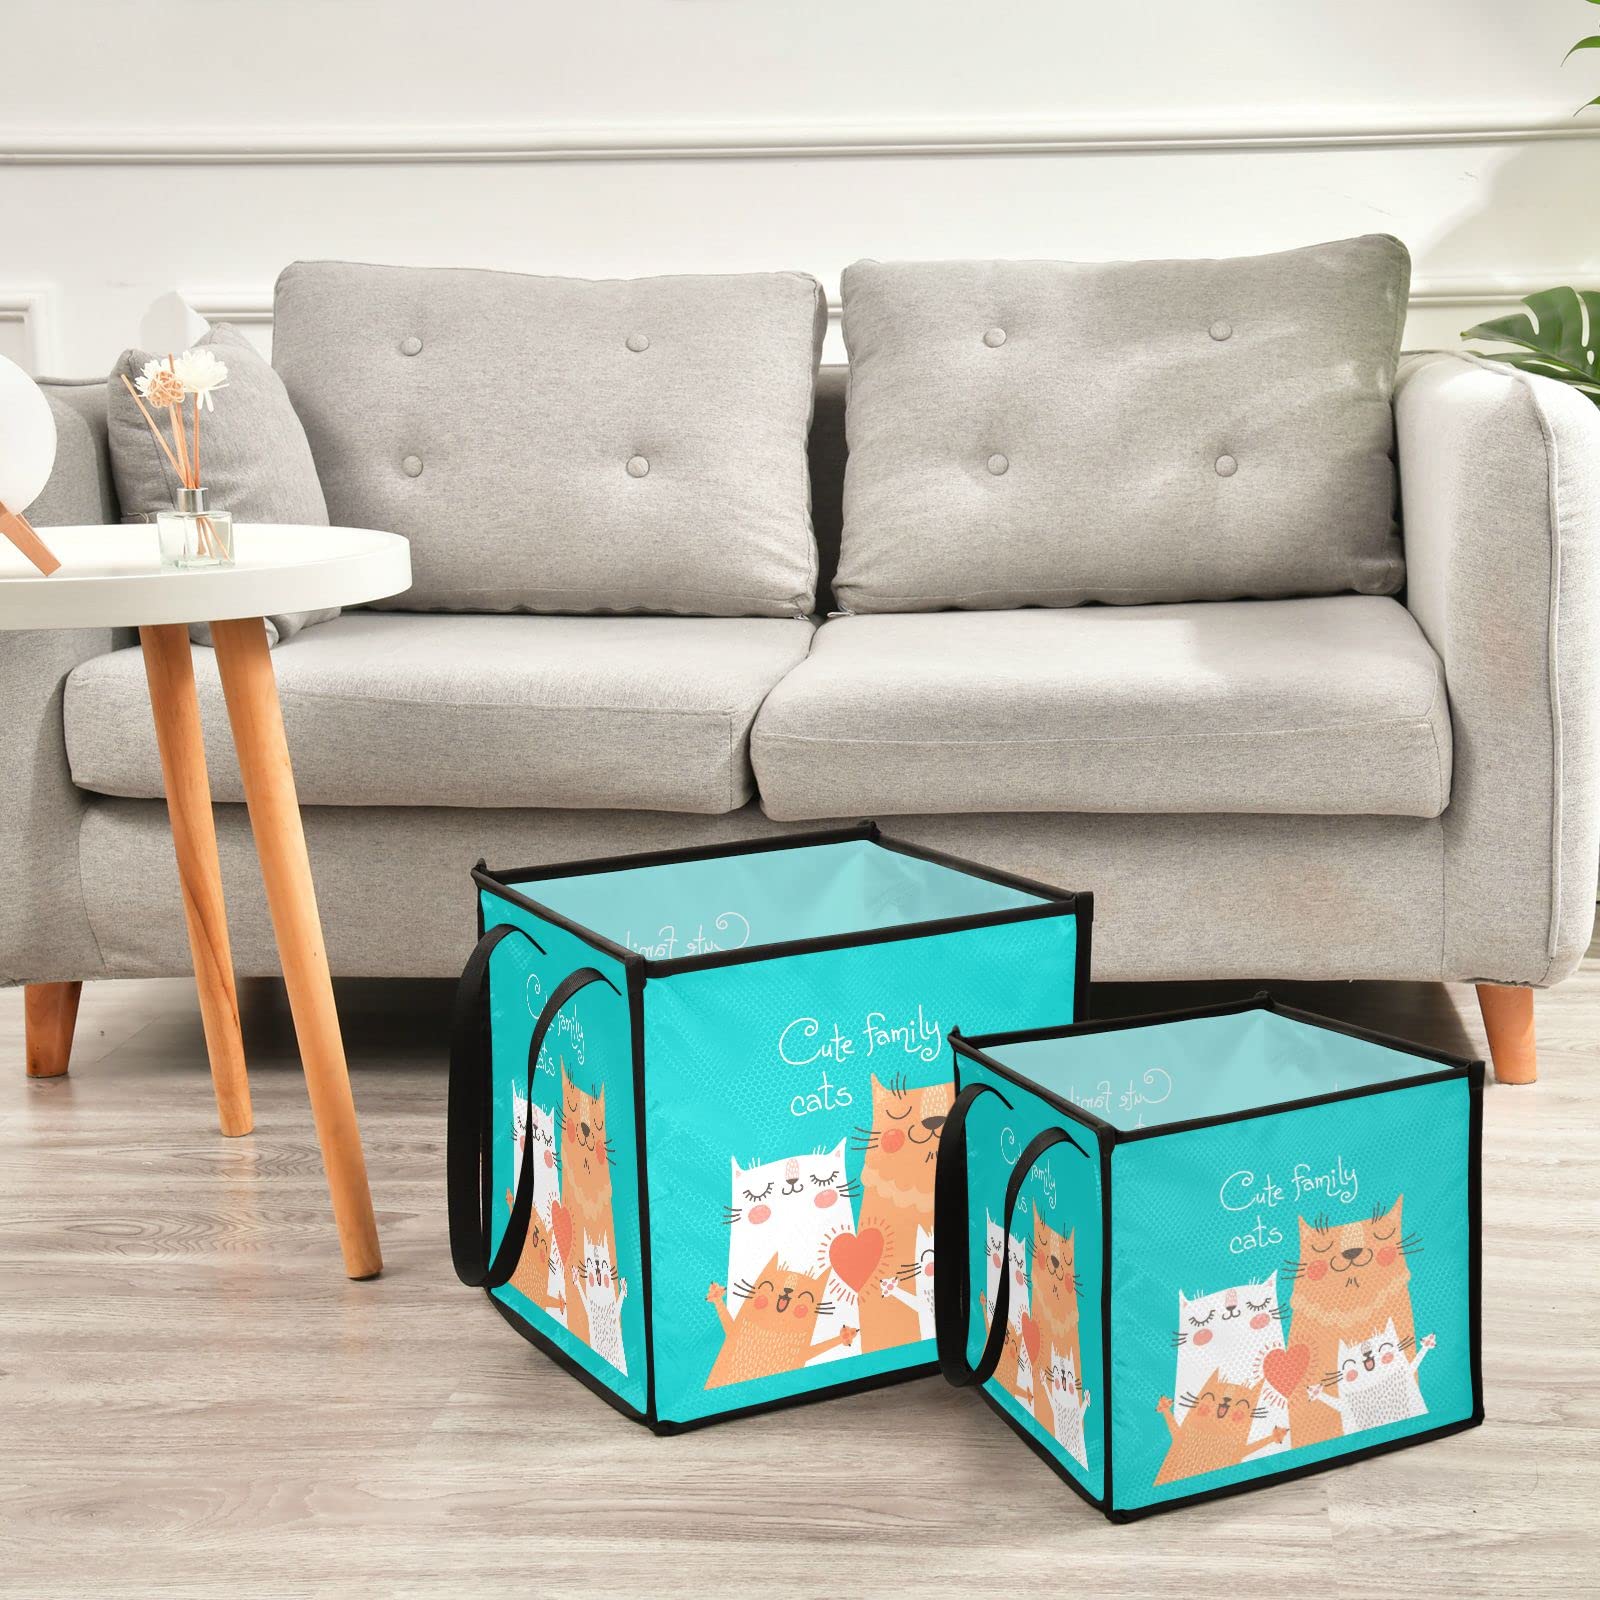 Poeticcity Cute Cats Family Parents and Children in Orange White on Turquoise Square Storage Basket Bin, Collapsible Storage Box, Baskets Organizer for Toy, Clothes Easy to Assemble 10.6x10.6x10.6 in